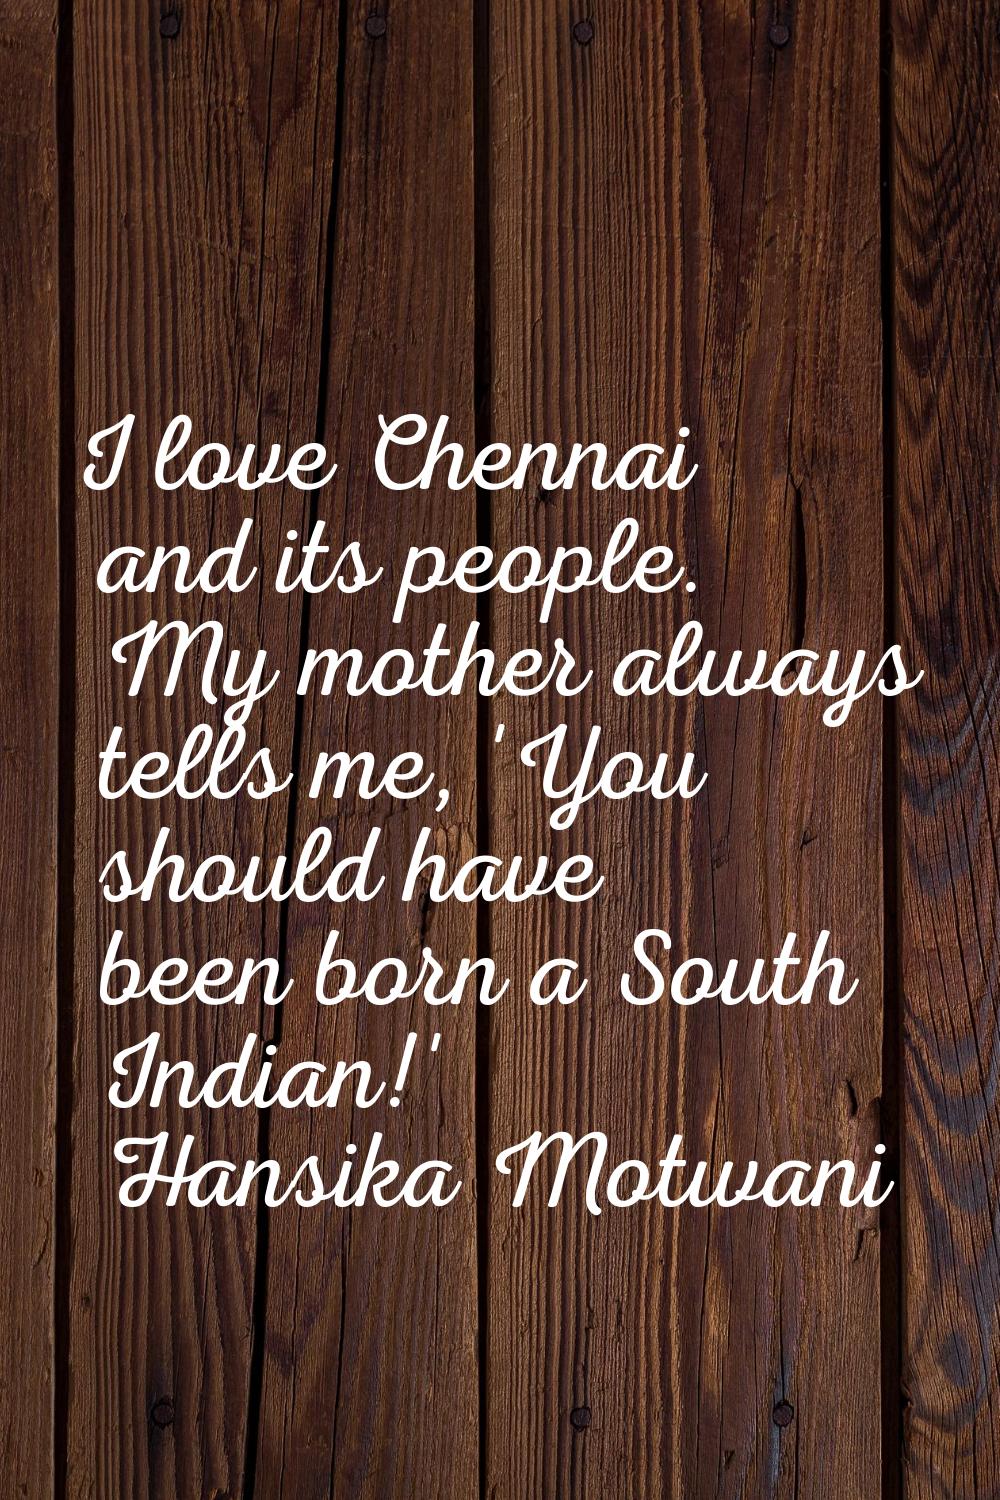 I love Chennai and its people. My mother always tells me, 'You should have been born a South Indian